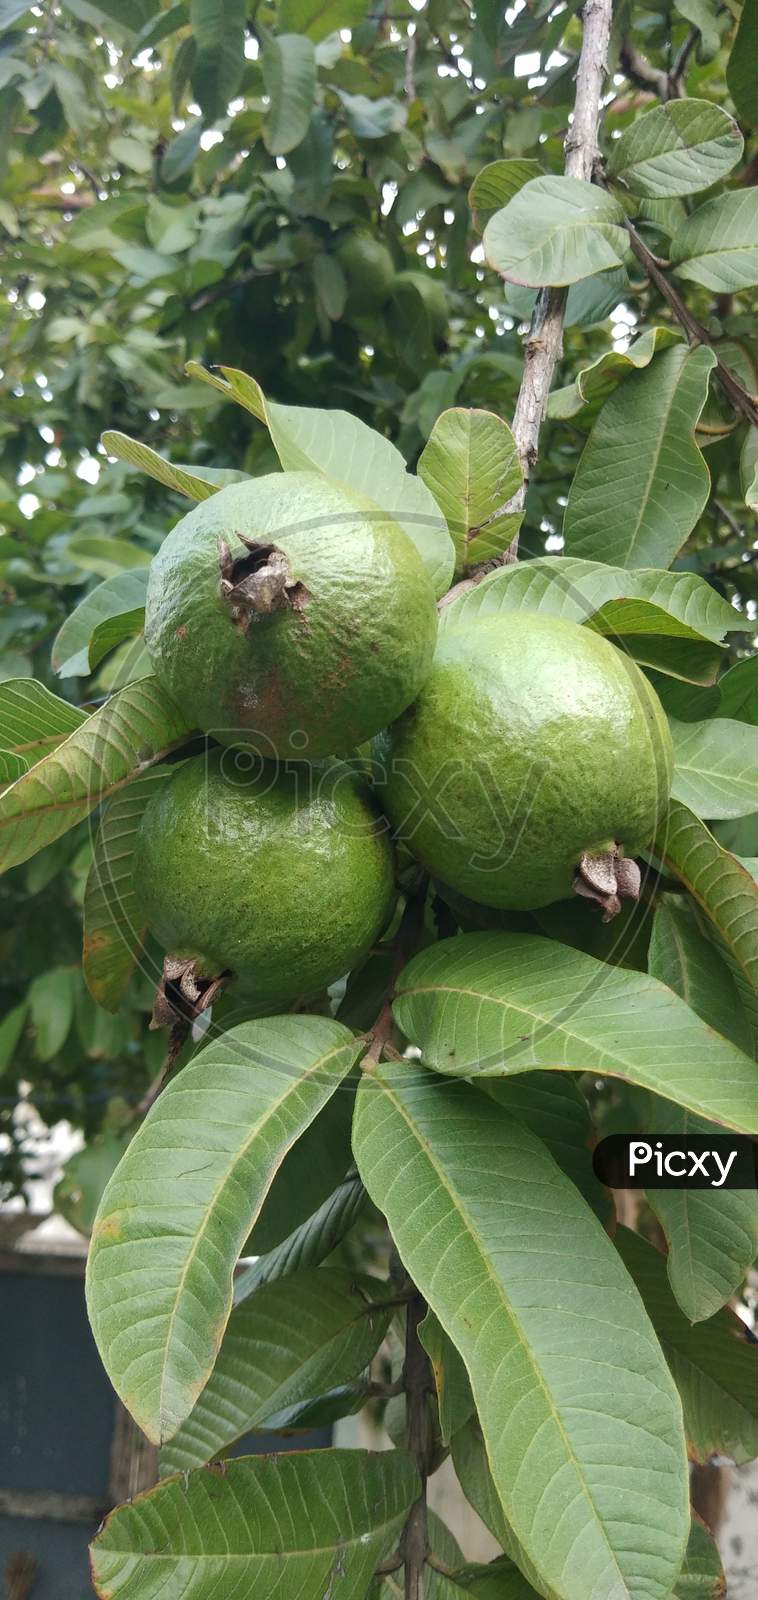 Triplet guavas with Leaflets